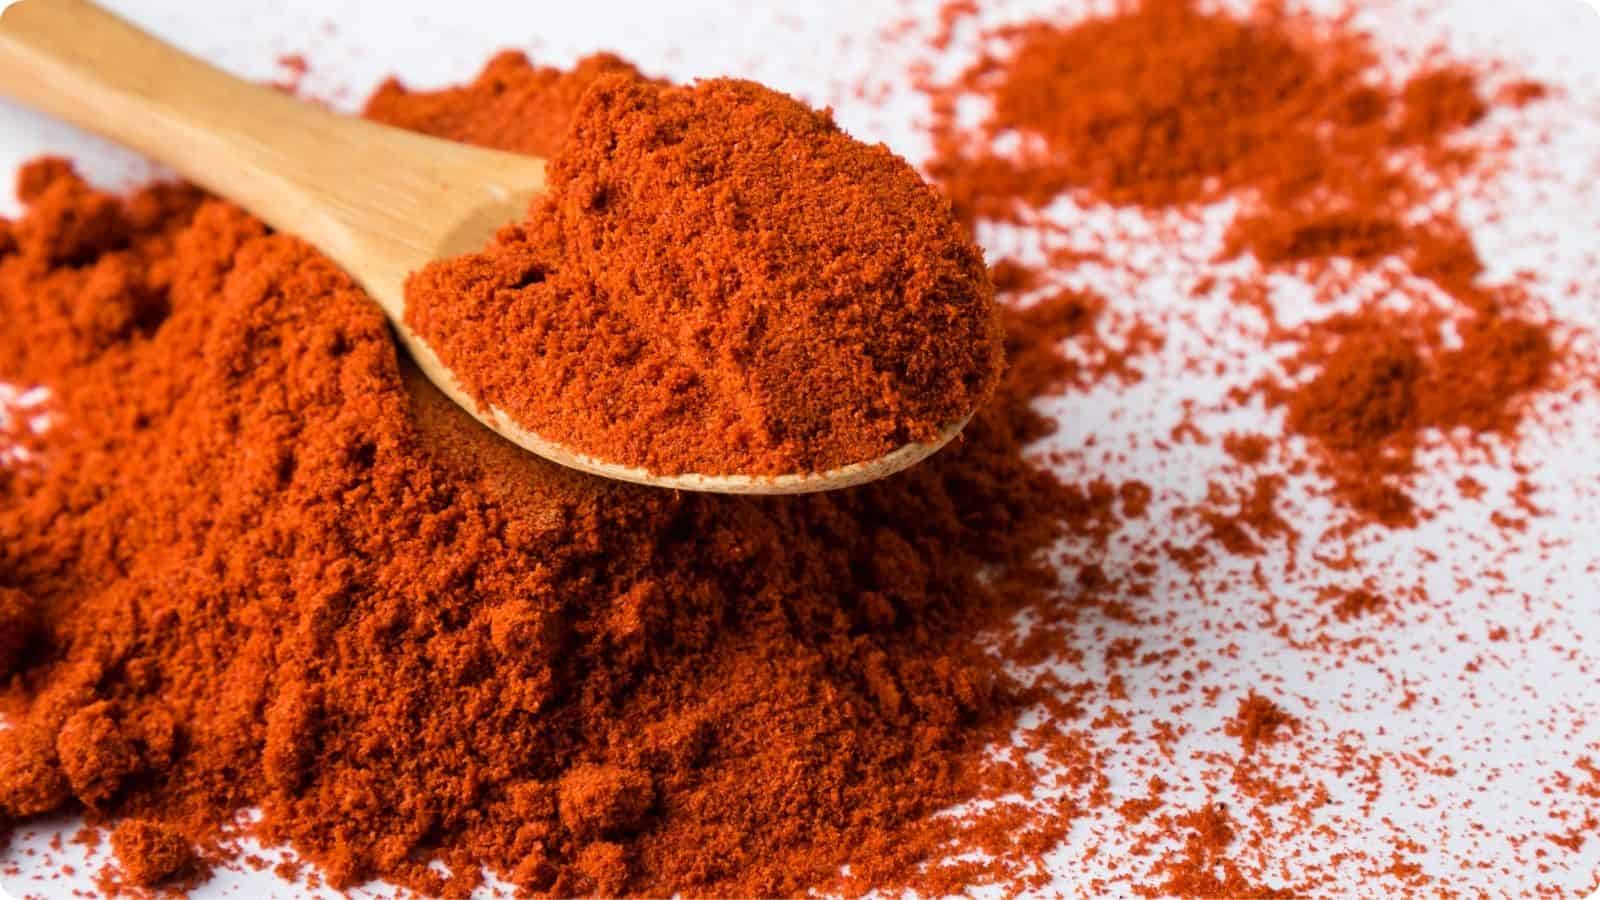 A heaping scoop of paprika scattered across a white table.
⁣⁣⁣⁣⁣⁣⁣⁣⁣⁣⁣